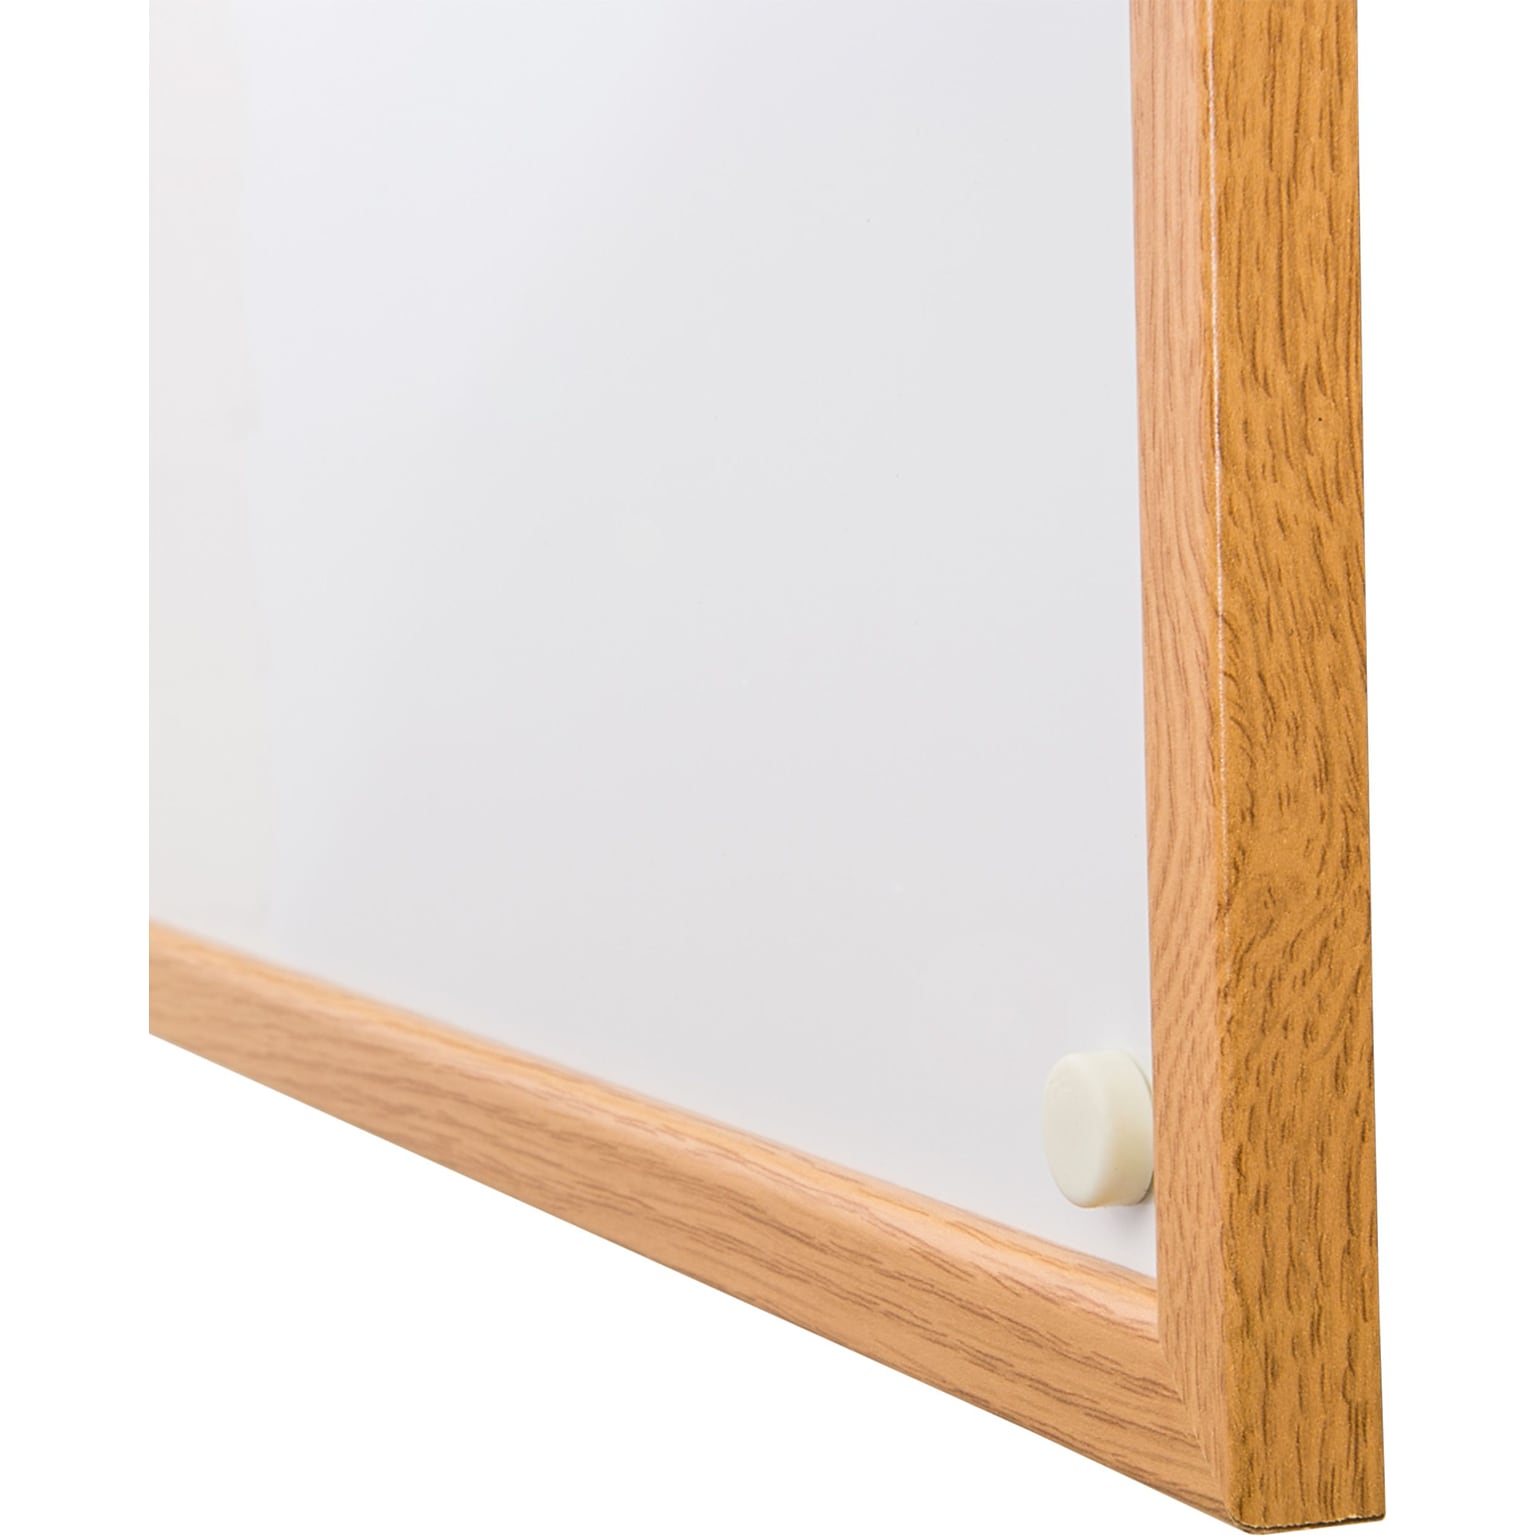 Viztex Lacquered Steel Magnetic Dry Erase Boards with Oak Effect Surround (48x36)